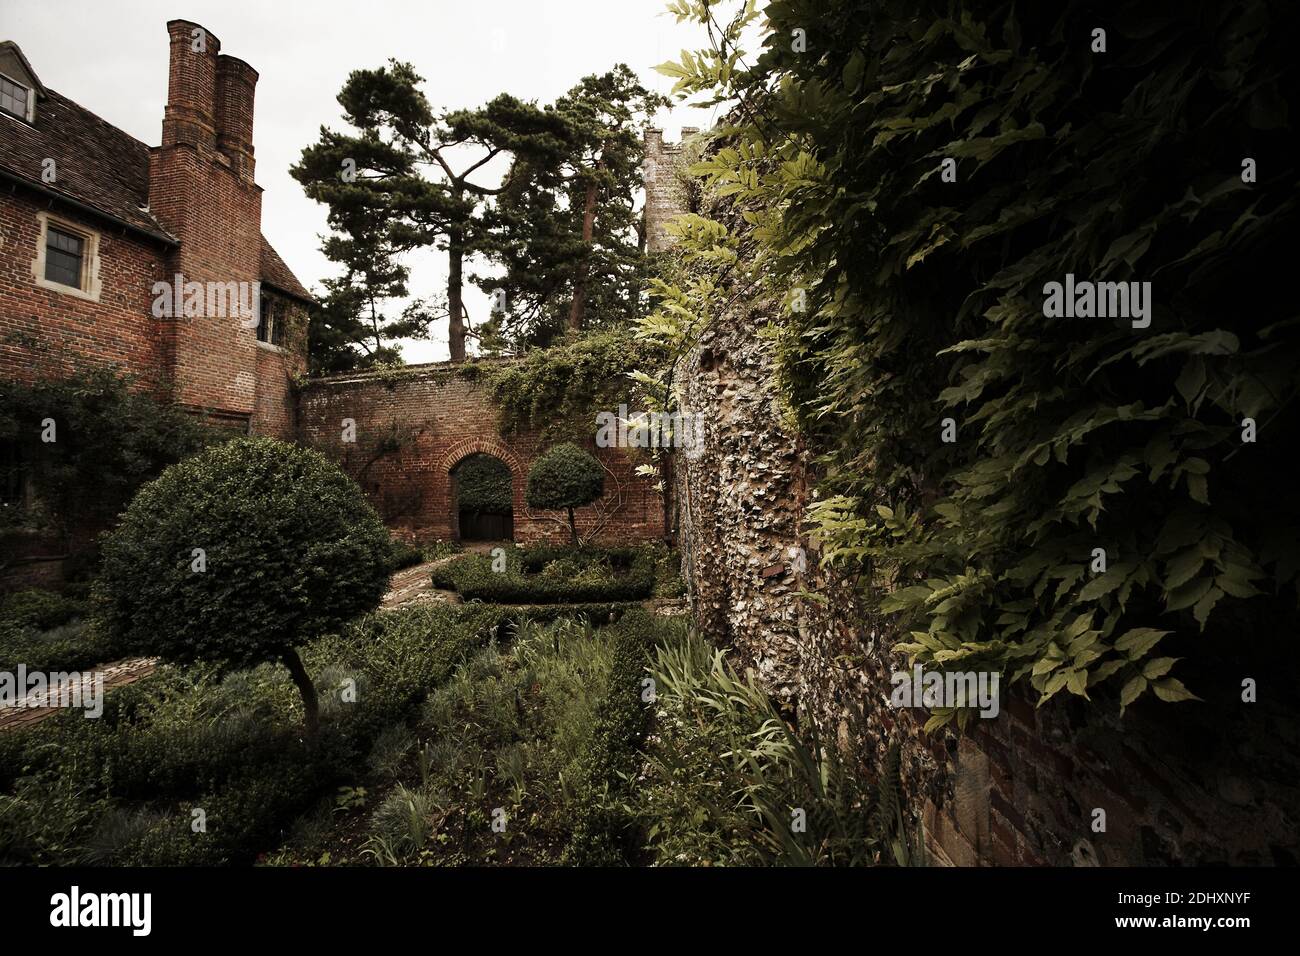 Walled garden at Greys Court, a 16th century Tudor mansion. Henley-on-Thames, Oxfordshire, England, UK. Stock Photo